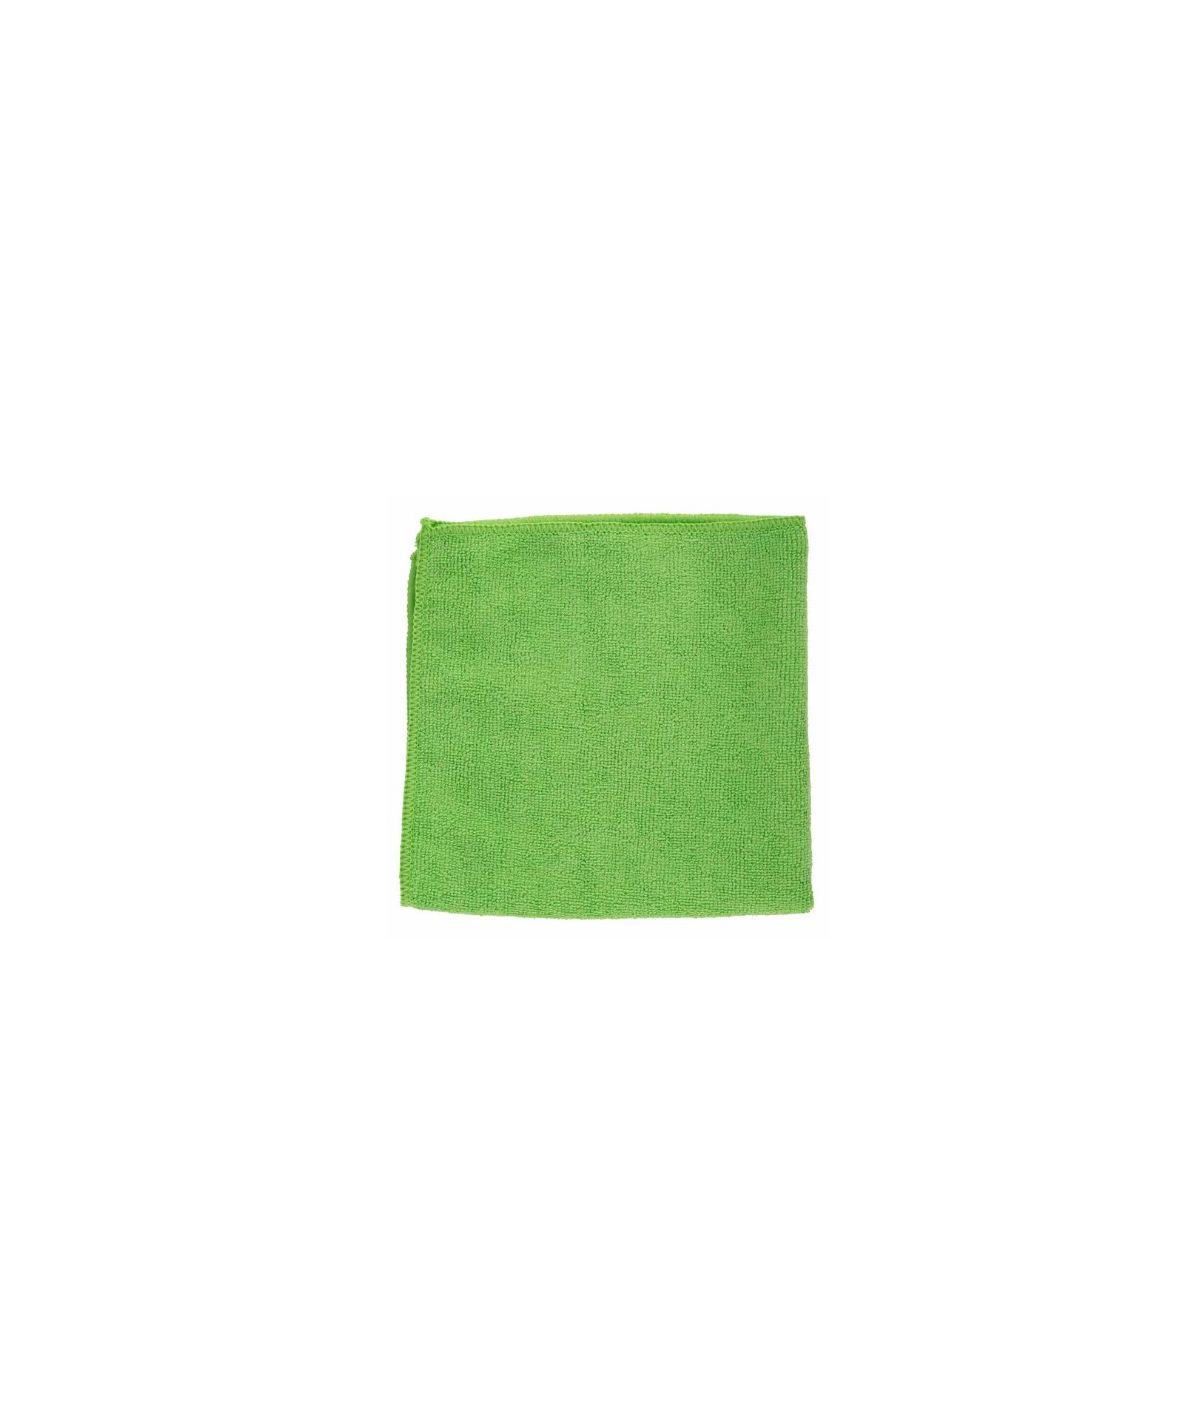 Microfibre Cloth Green 300gsm Pack of 10